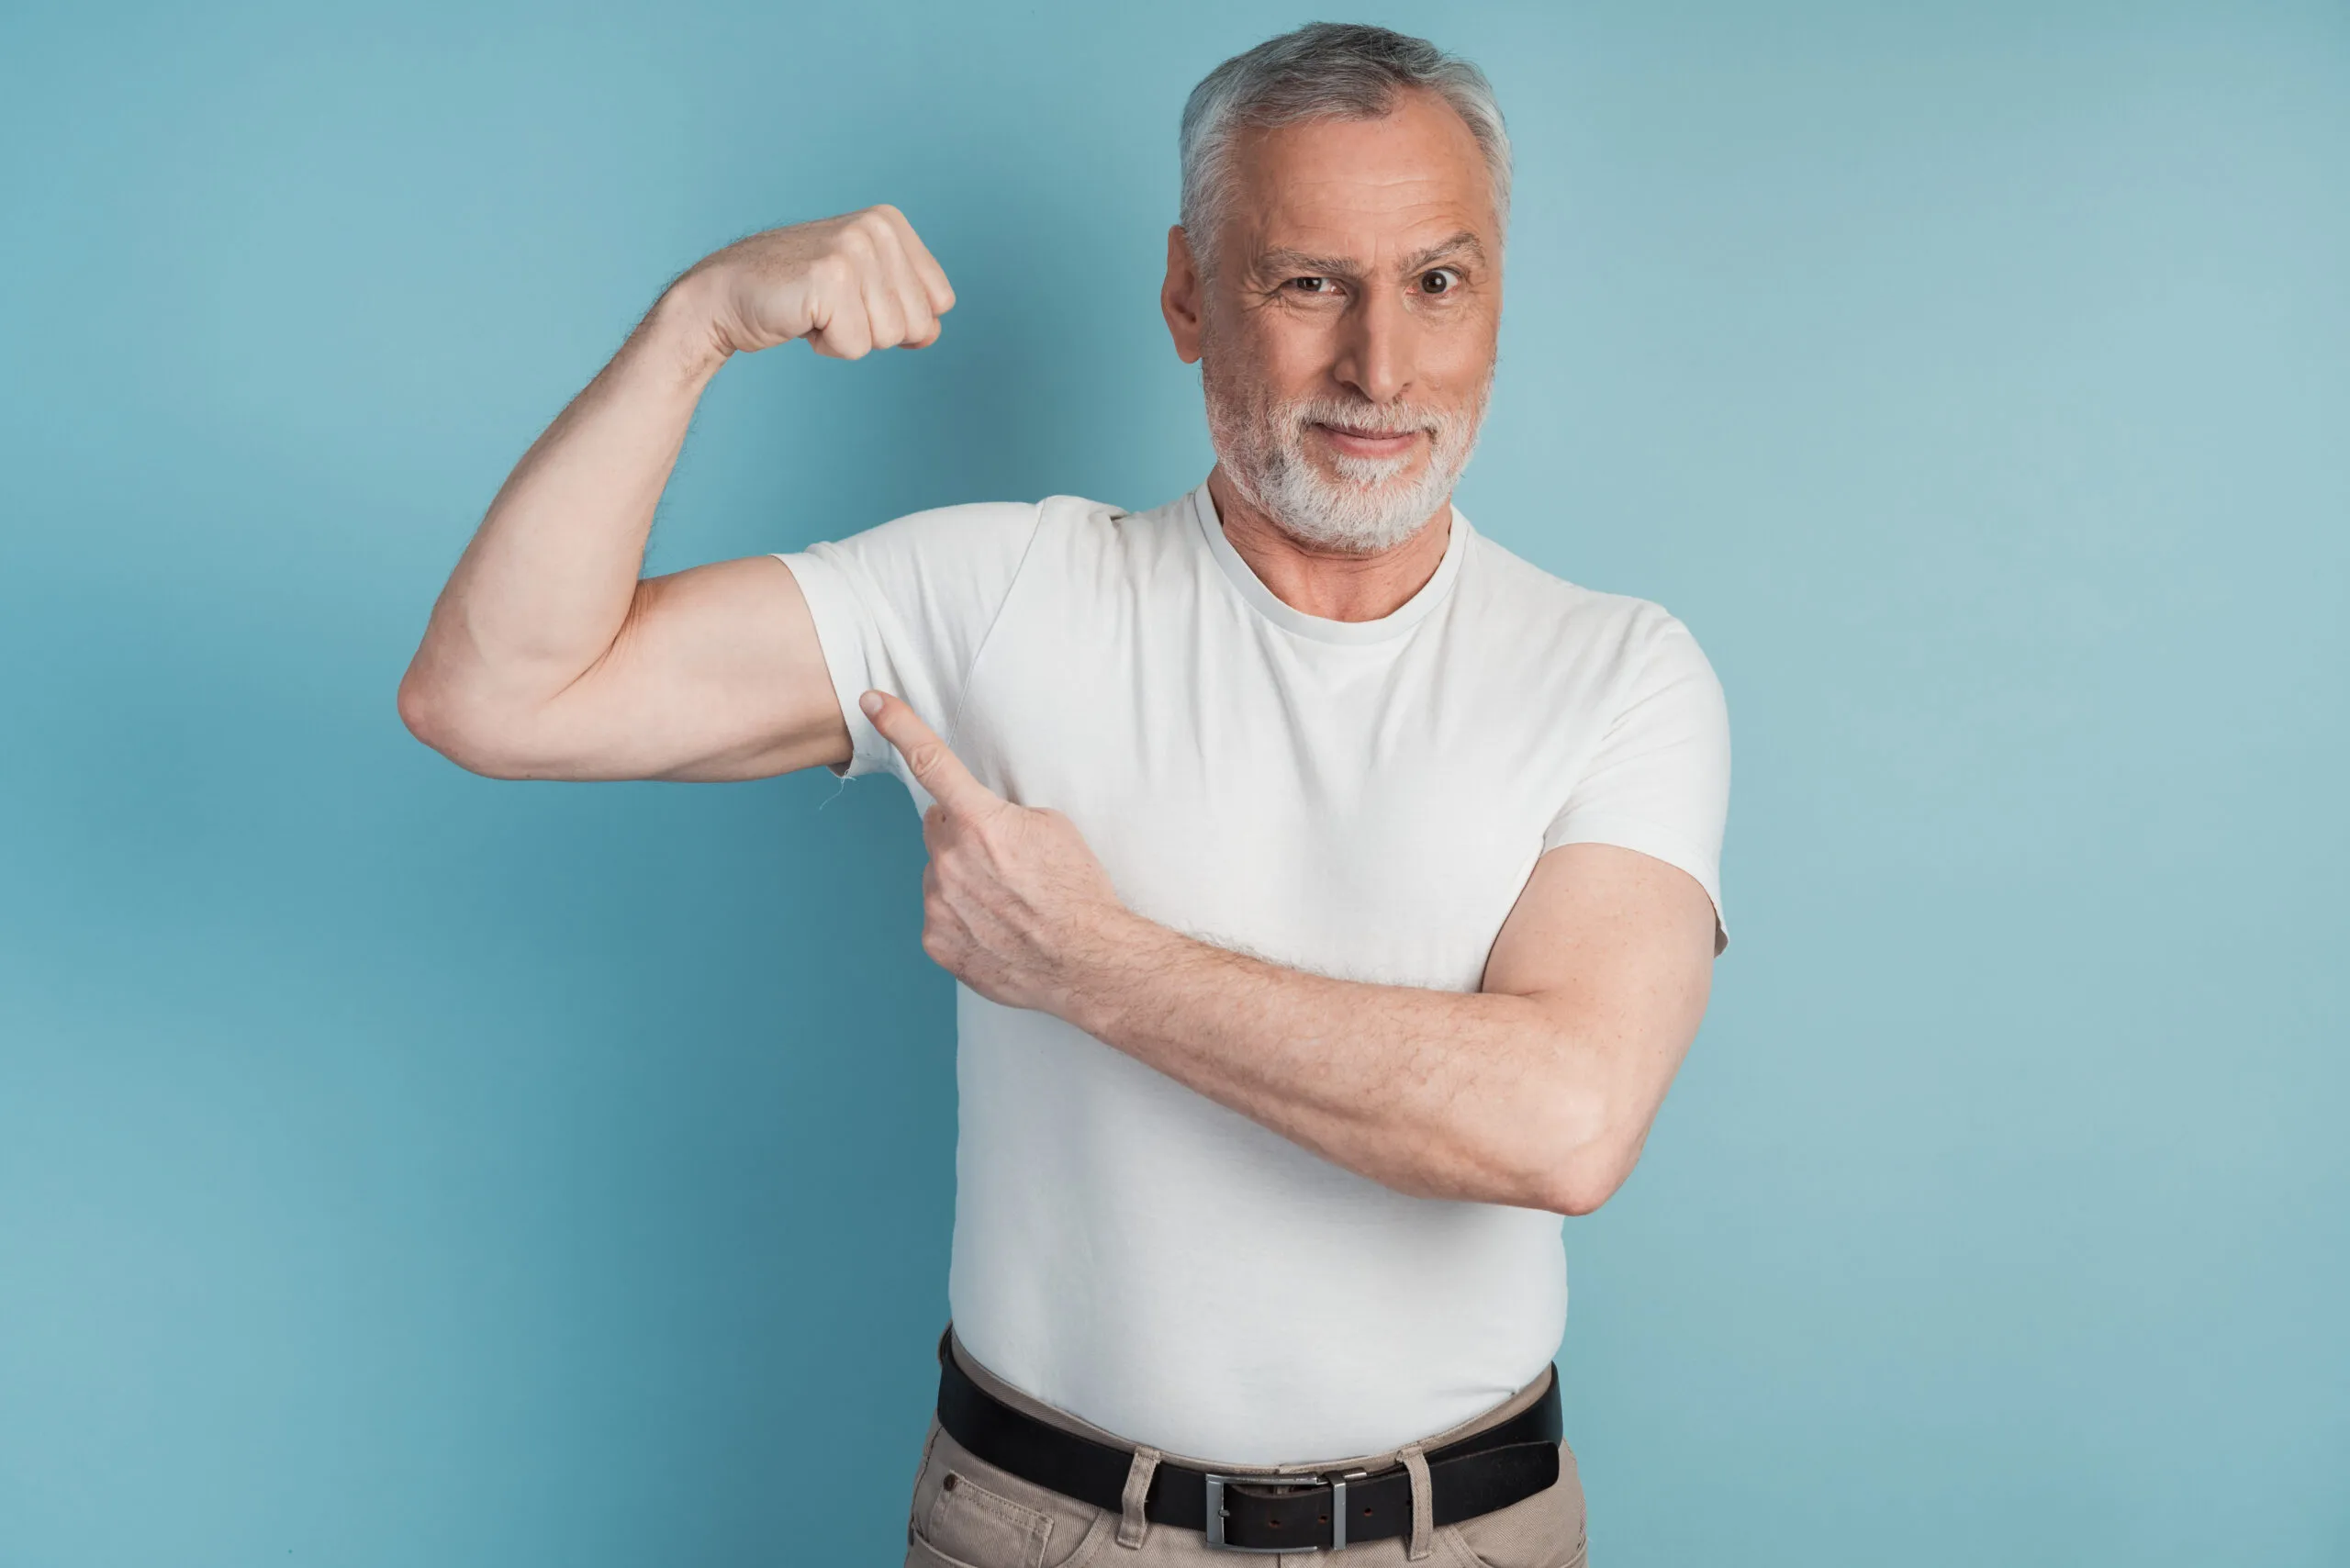 50-Year-Old Muscles Just Can’t Grow Big Like They Used To – The Biology of How Muscles Change With Age